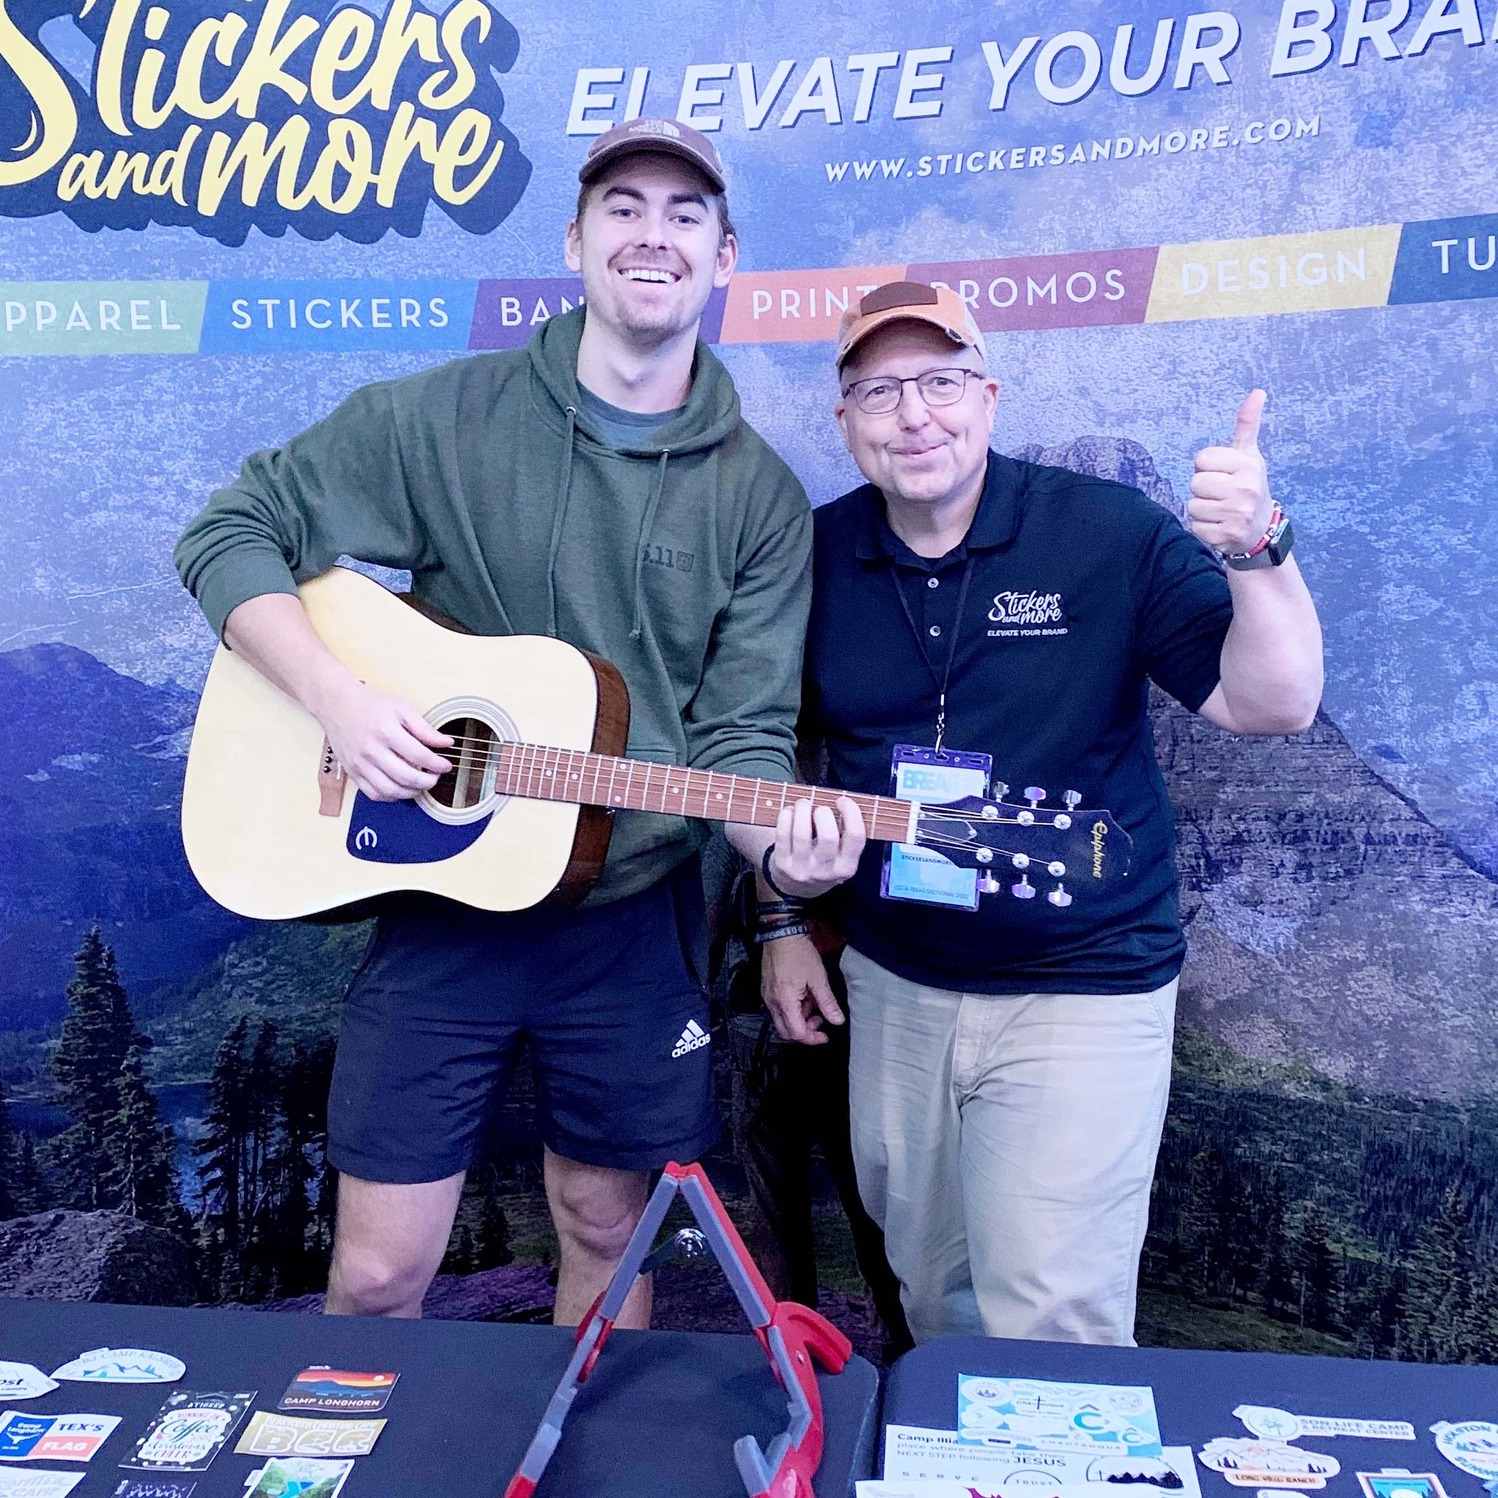 Congrats to Stephen from Lake Lavon Camp on winning the guitar giveaway at the Christian Camp and Conference Association Texas Sectional on February 7th. If you are looking to elevate your brand, give us a shout or check out our website and see how we can help you take your brand up a notch.
https://stickersandmore.com/camp/
Lake Lavon Camp & Conference Center
#CCCA #camplife #guitar #WINNERSWIN #giveaway #churchlife #stickers #camp